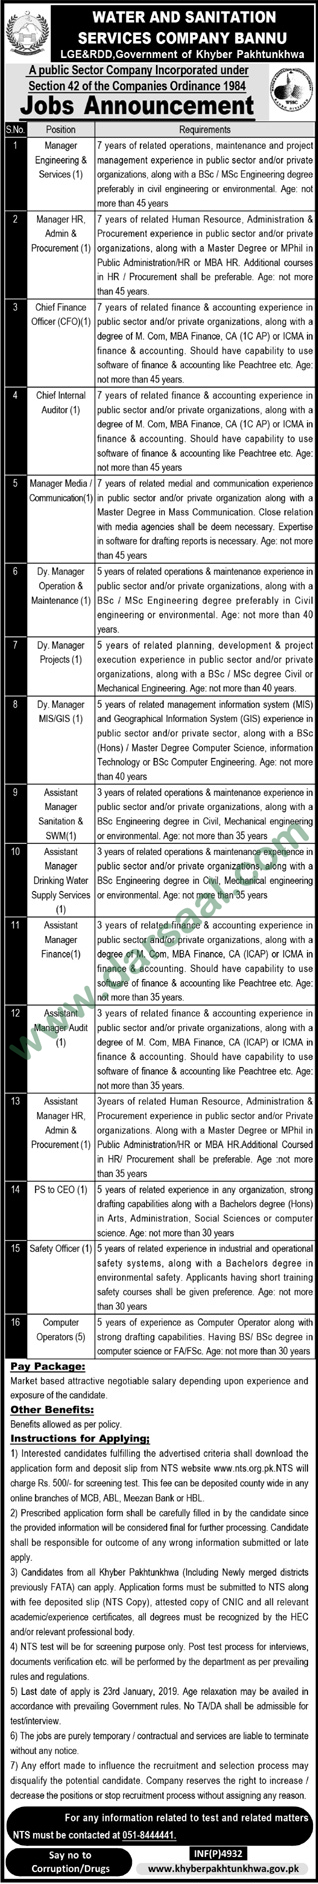 Deputy Manager Jobs in Water & Sanitation Services Company Bannu in Bannu - Dec 27, 2018